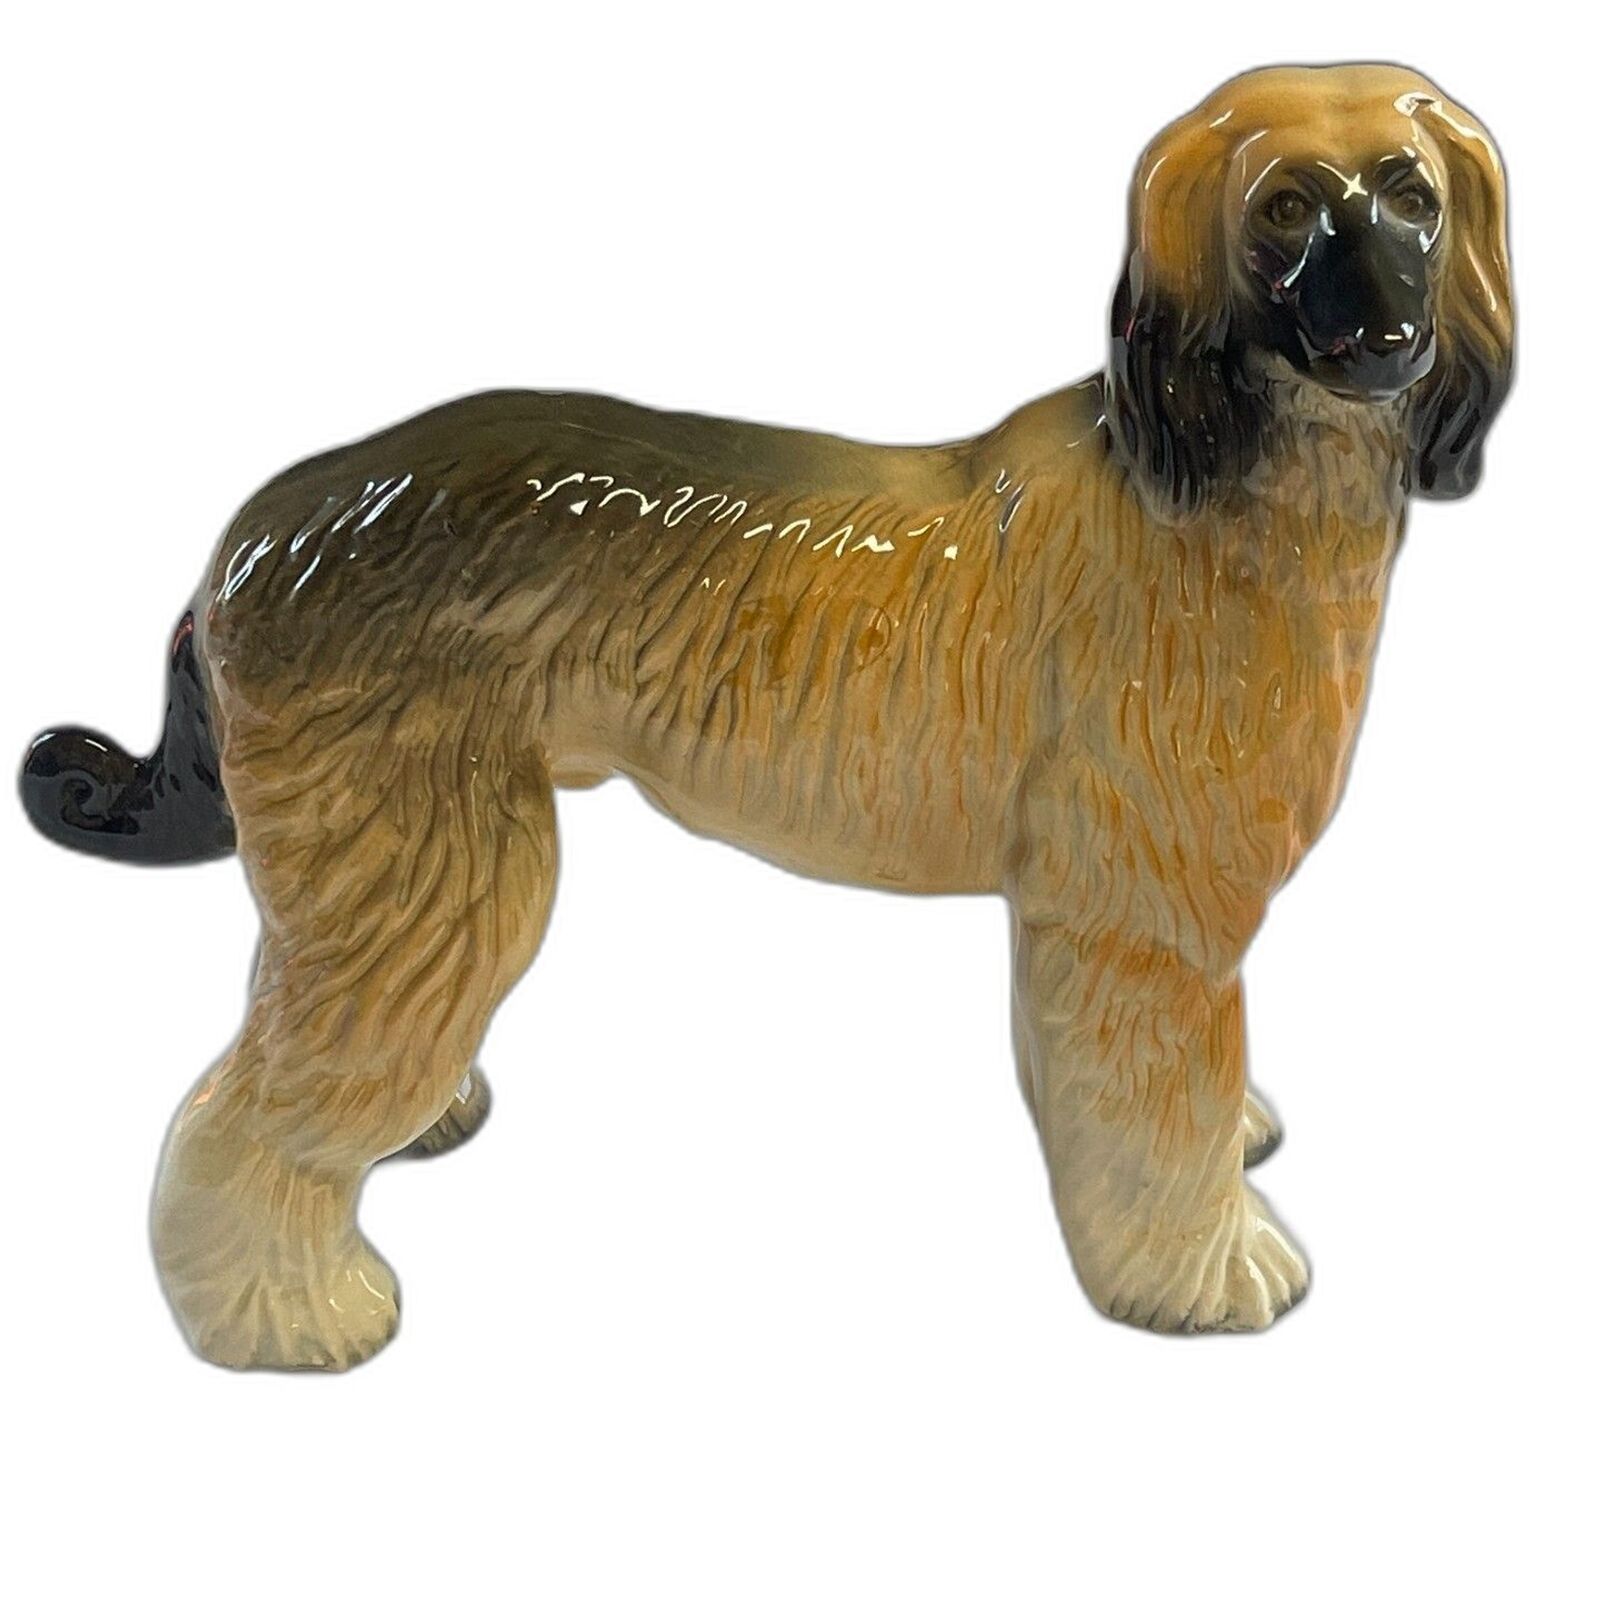 Vintage Afghan Hound Dog Figurine - Beautifully Detailed Ceramic Collectible